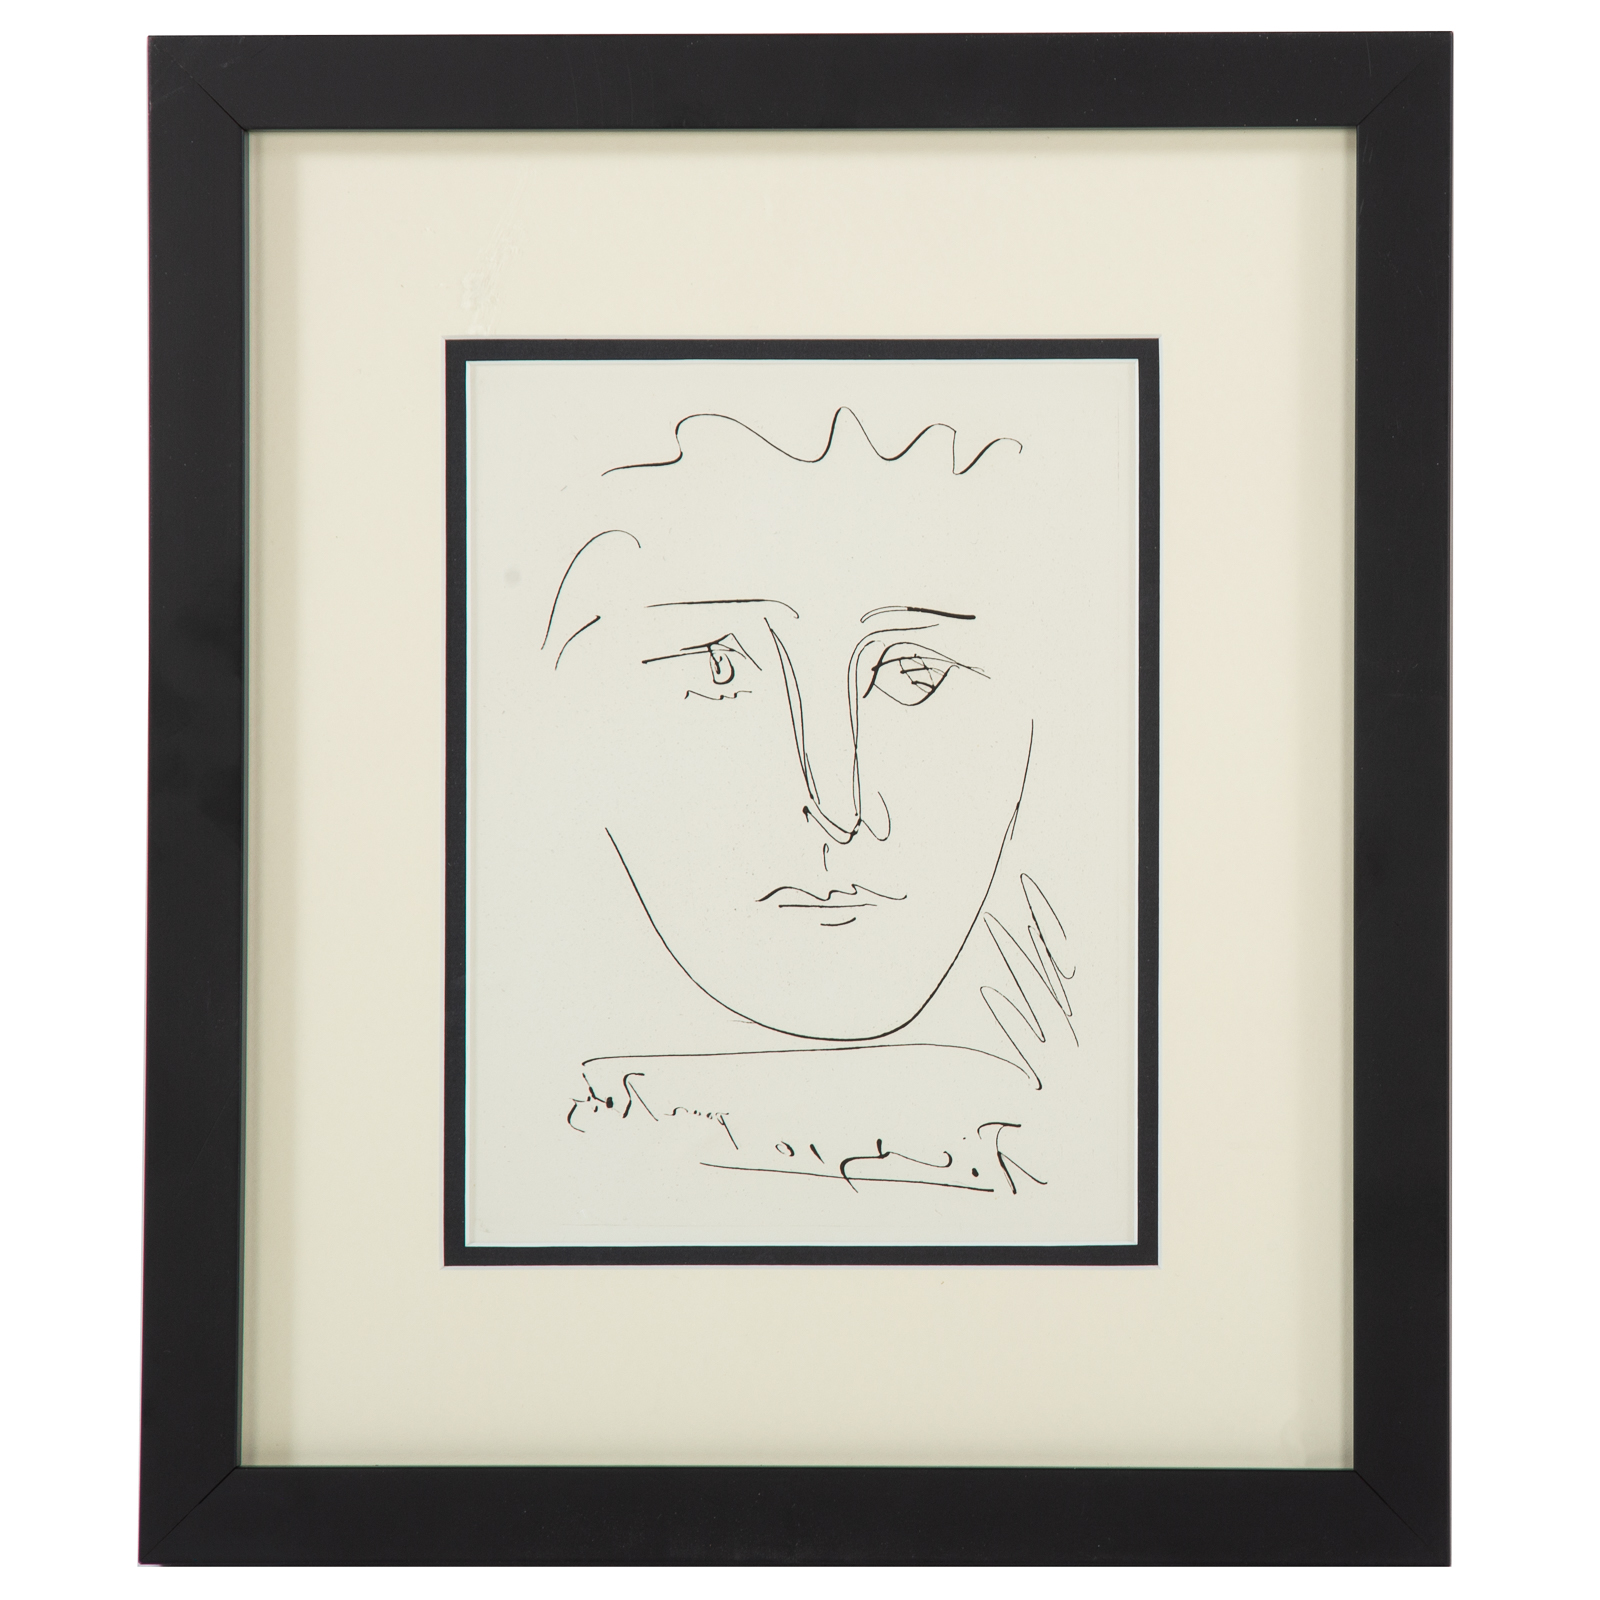 PABLO PICASSO. "POUR ROBY," ETCHING